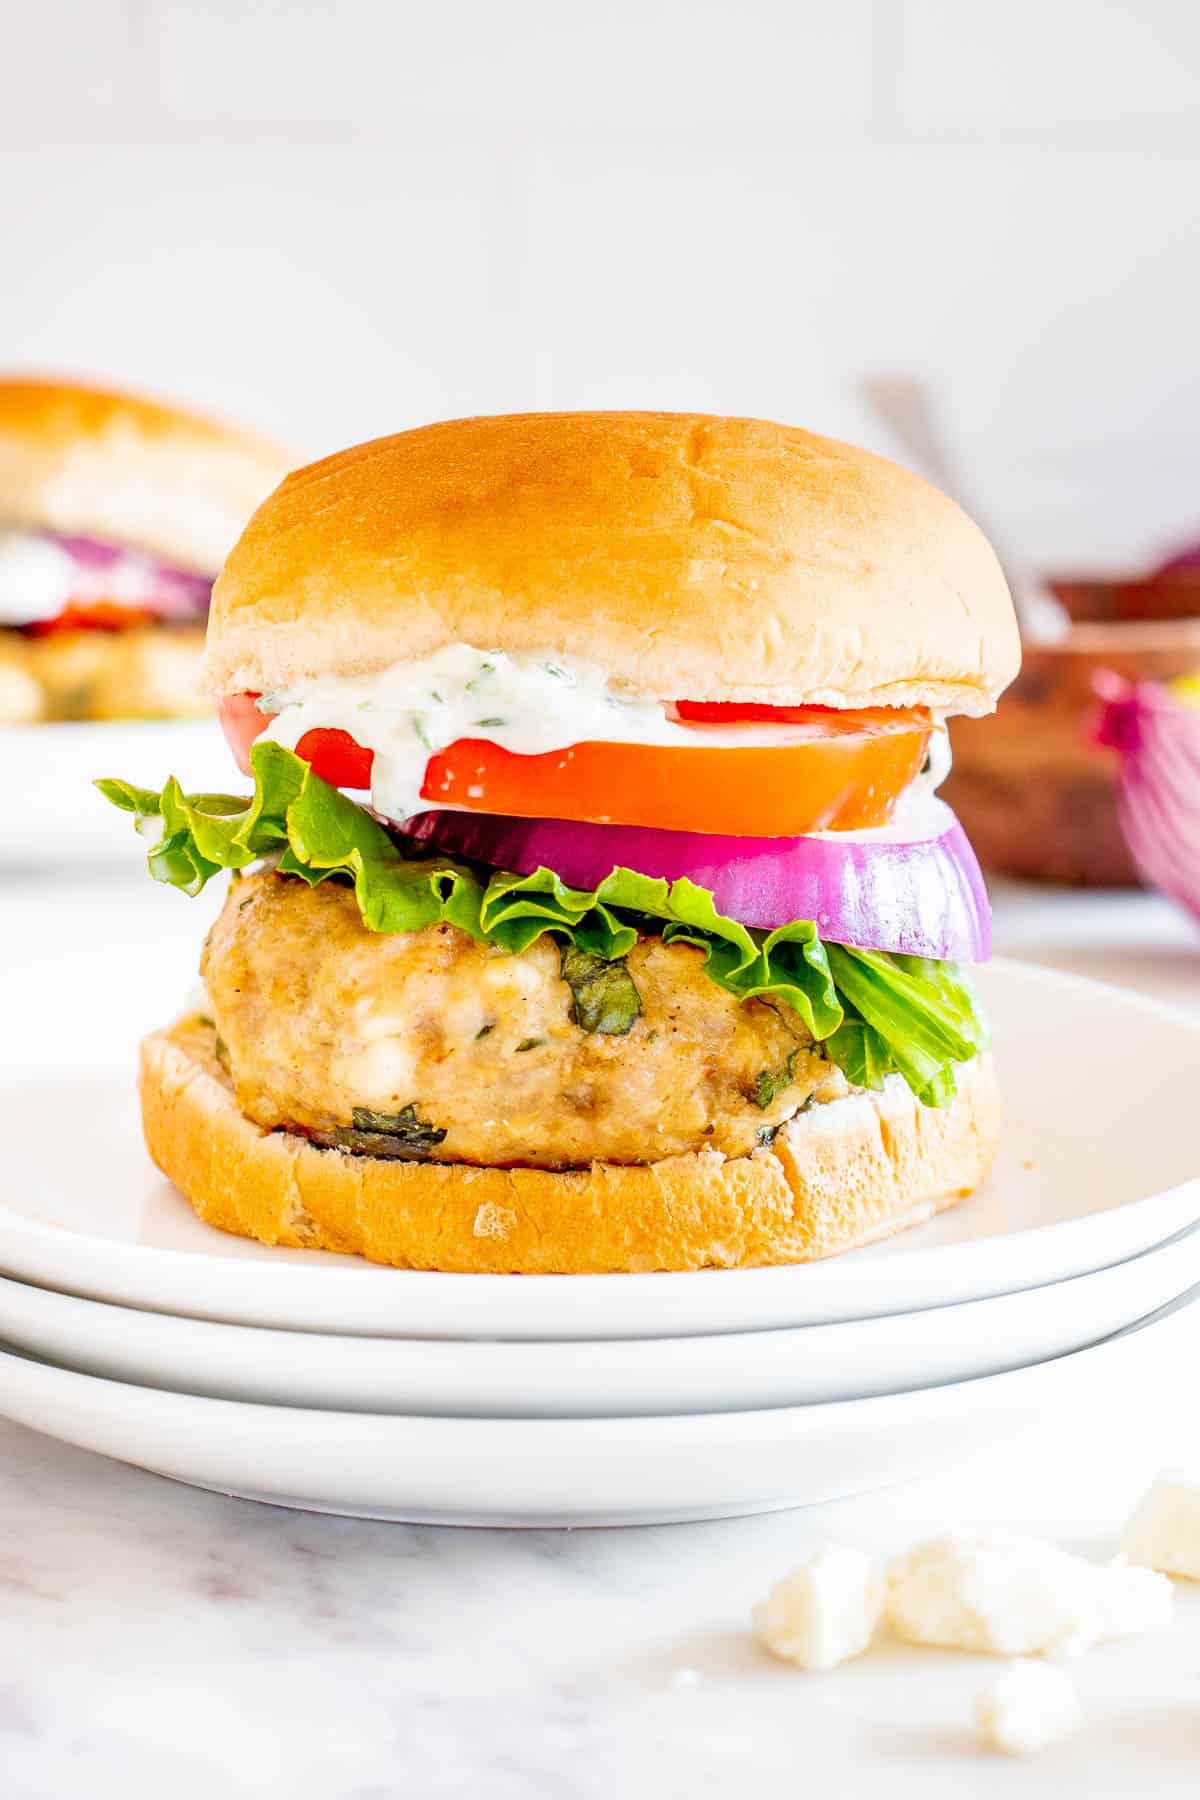 Grilled Greek chicken burger with tomato, onion, lettuce, and tzatziki sauce on a bun.